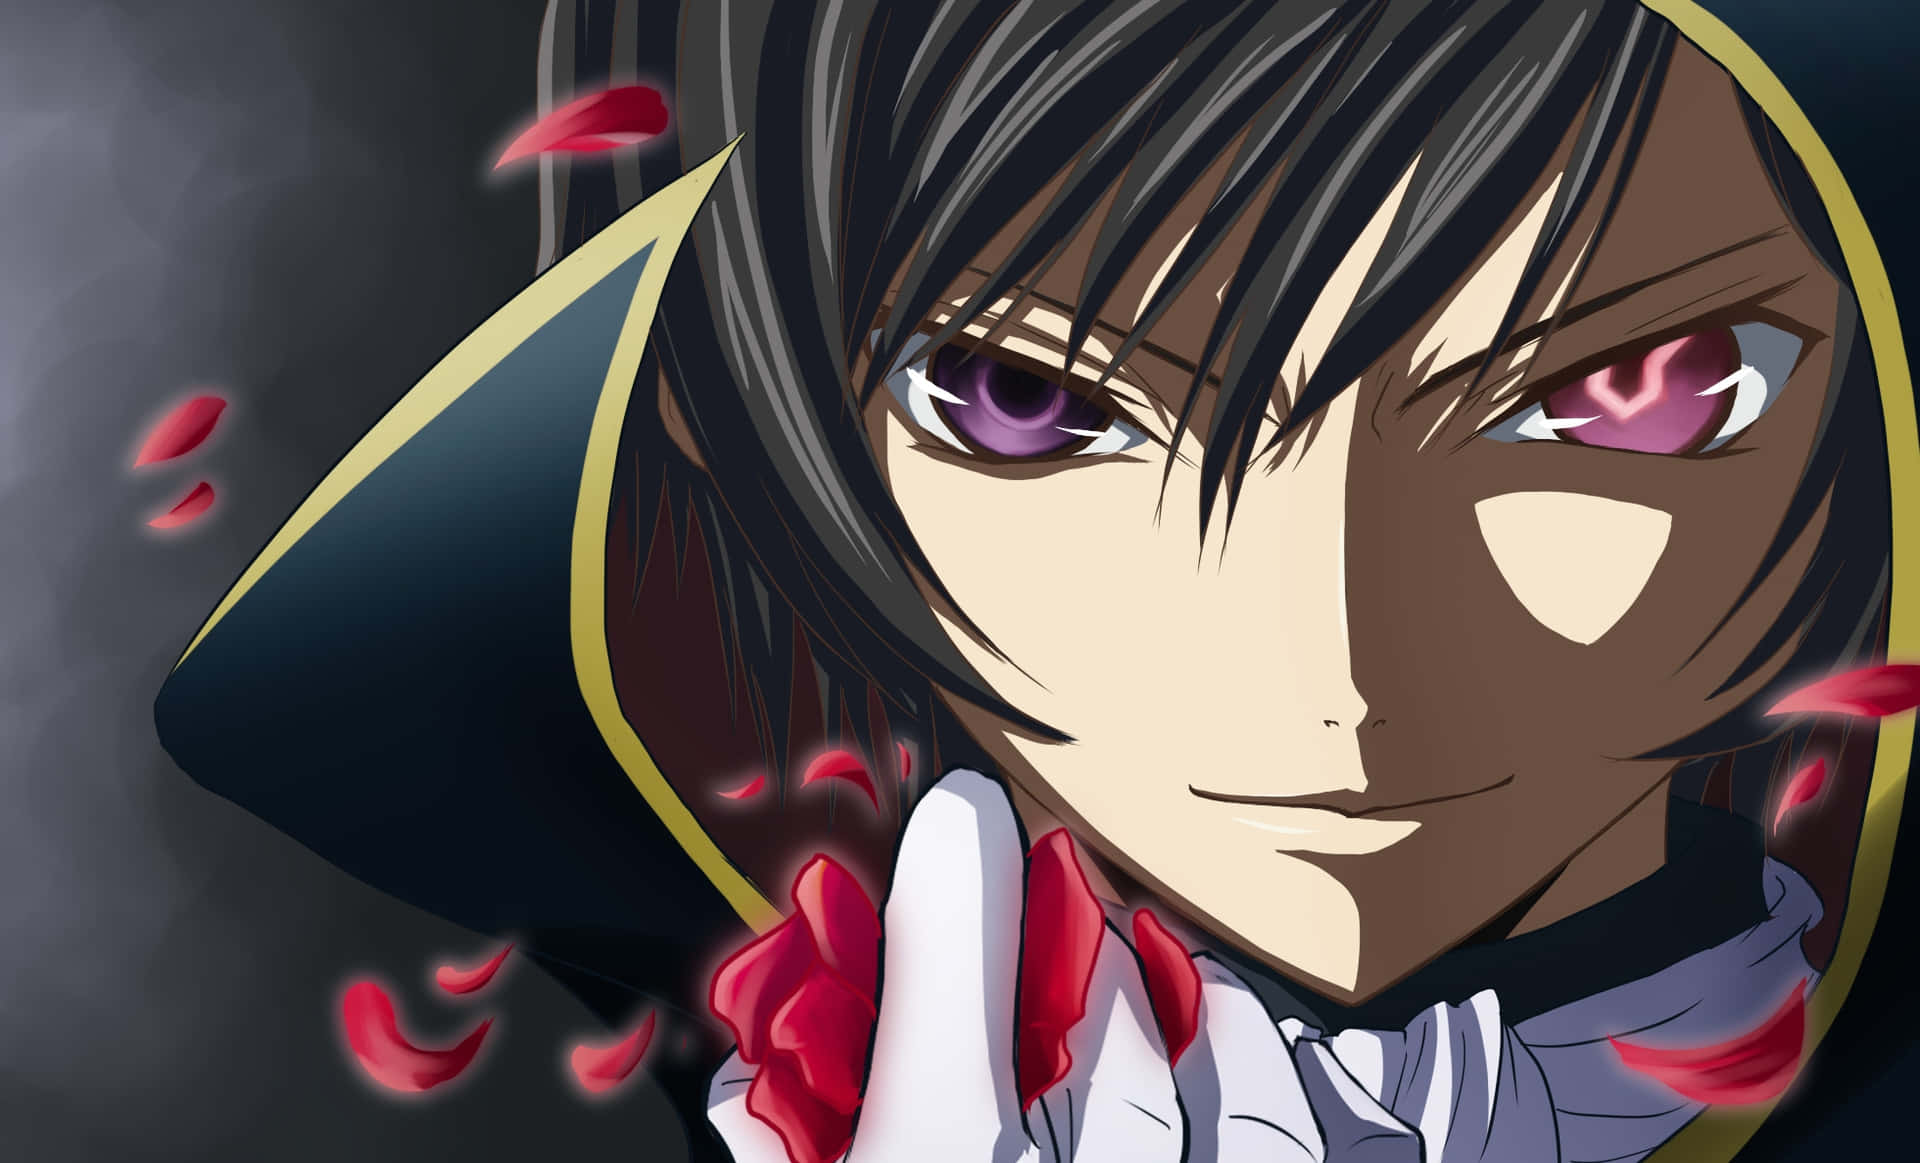 Unlock the power of Geass in this epic anime